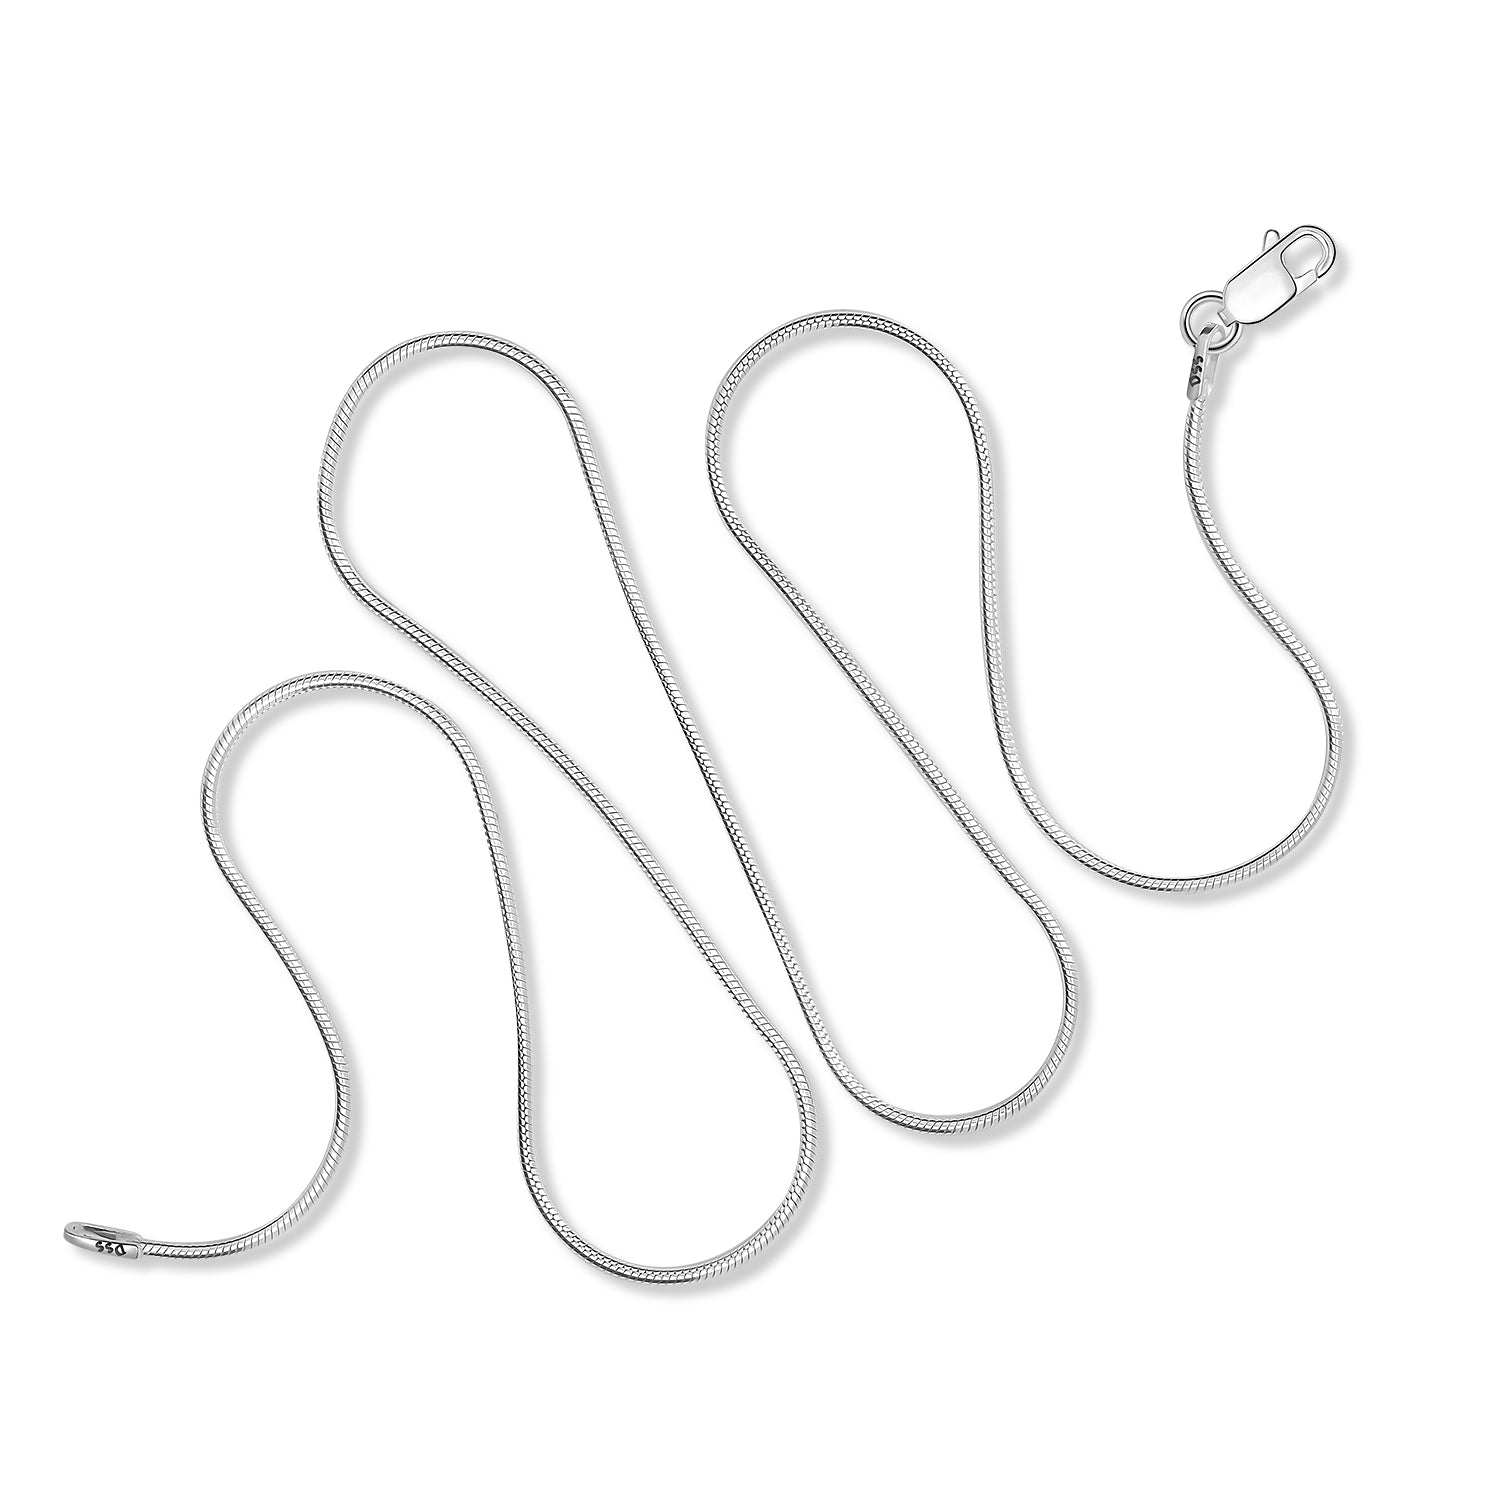 Italian 2mm Sterling Silver Snake Chain Necklace(Lengths 14,16,18,20,22,24,30,36)